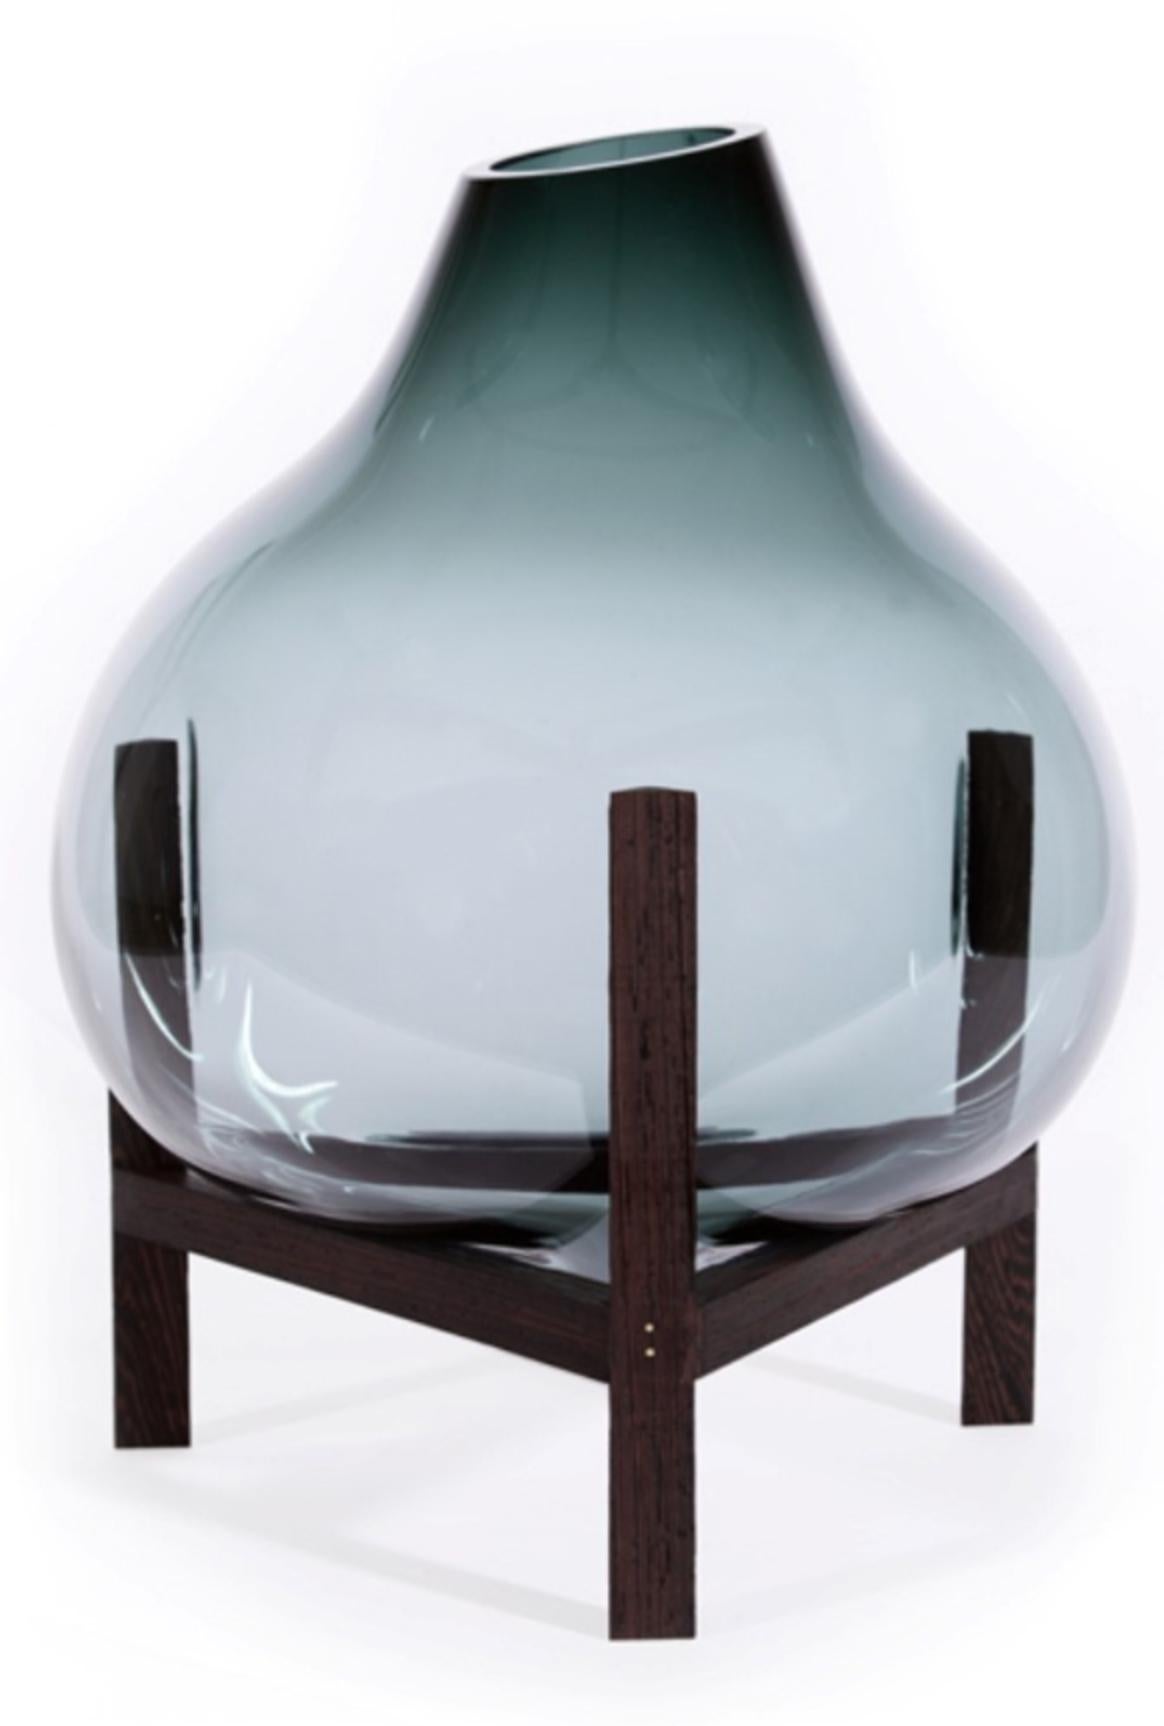 Round square grey triangular vase by Studio Thier & van Daalen
Dimensions: W 24 x D 24 x H 38 cm
Materials: Wood, Glass

When blowing soap bubbles in the air Iris & Ruben had the dream to capture these temporary beauties in a tendril frame. The